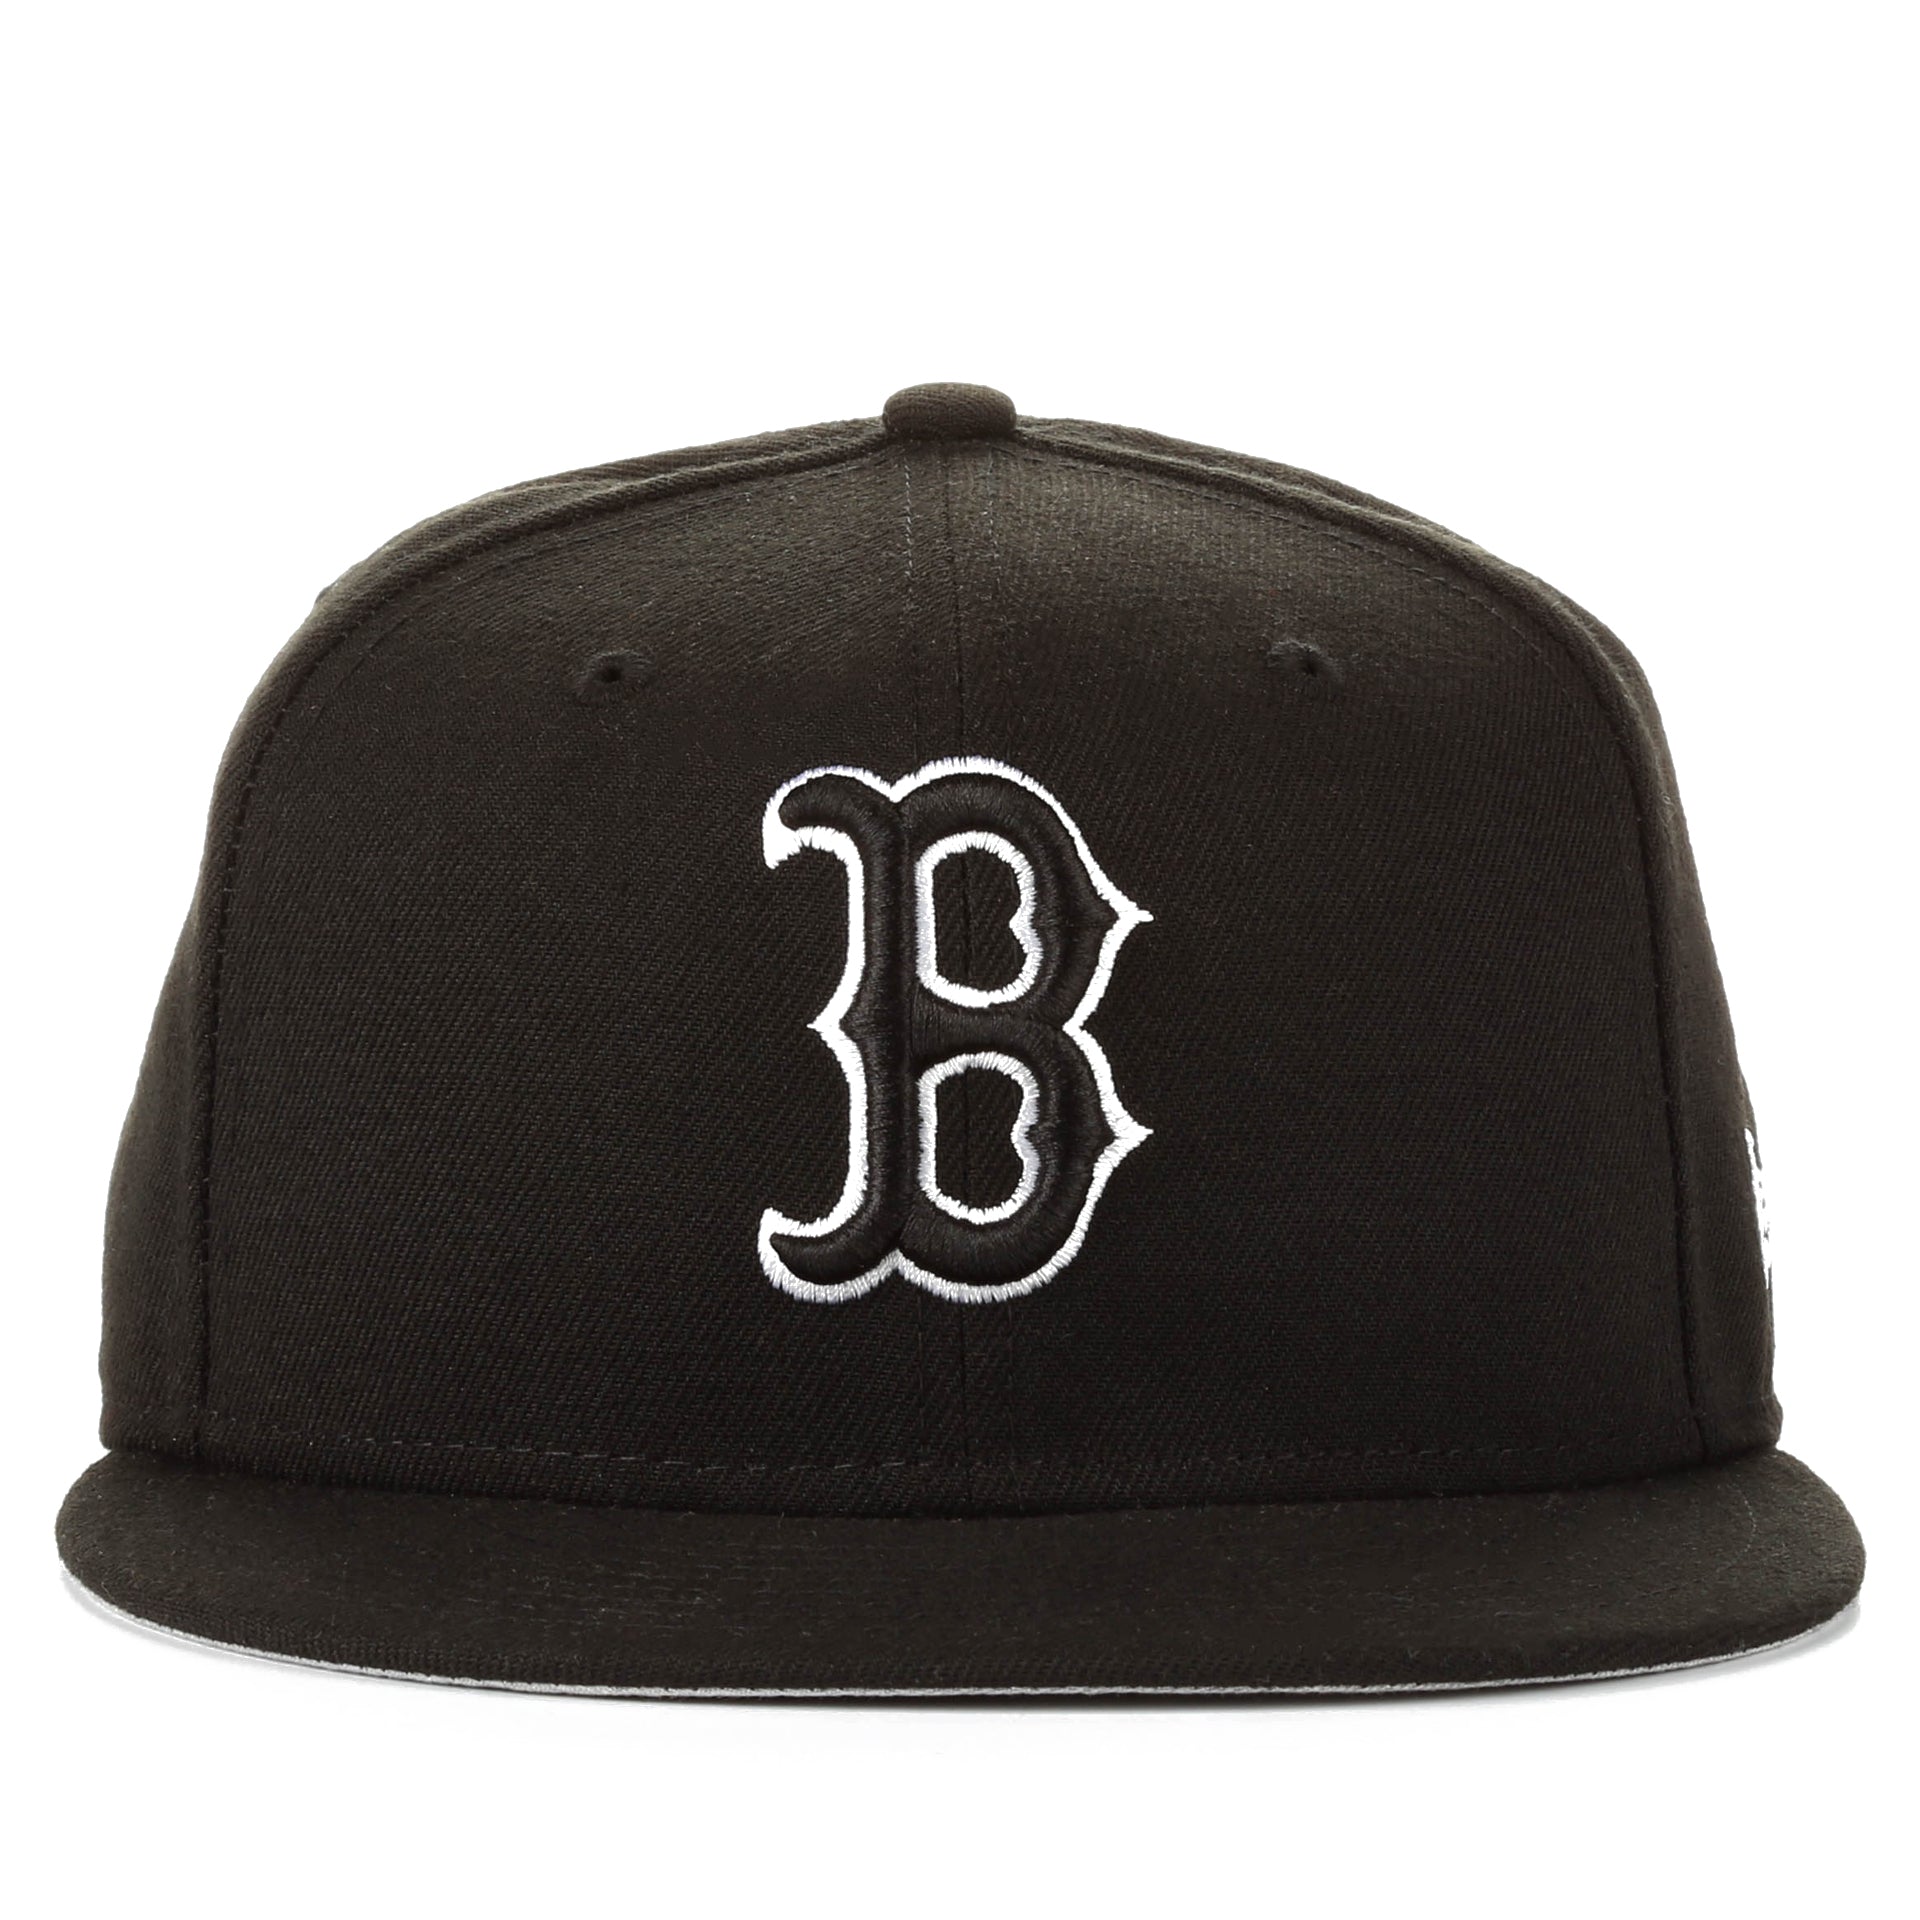 white red sox hat